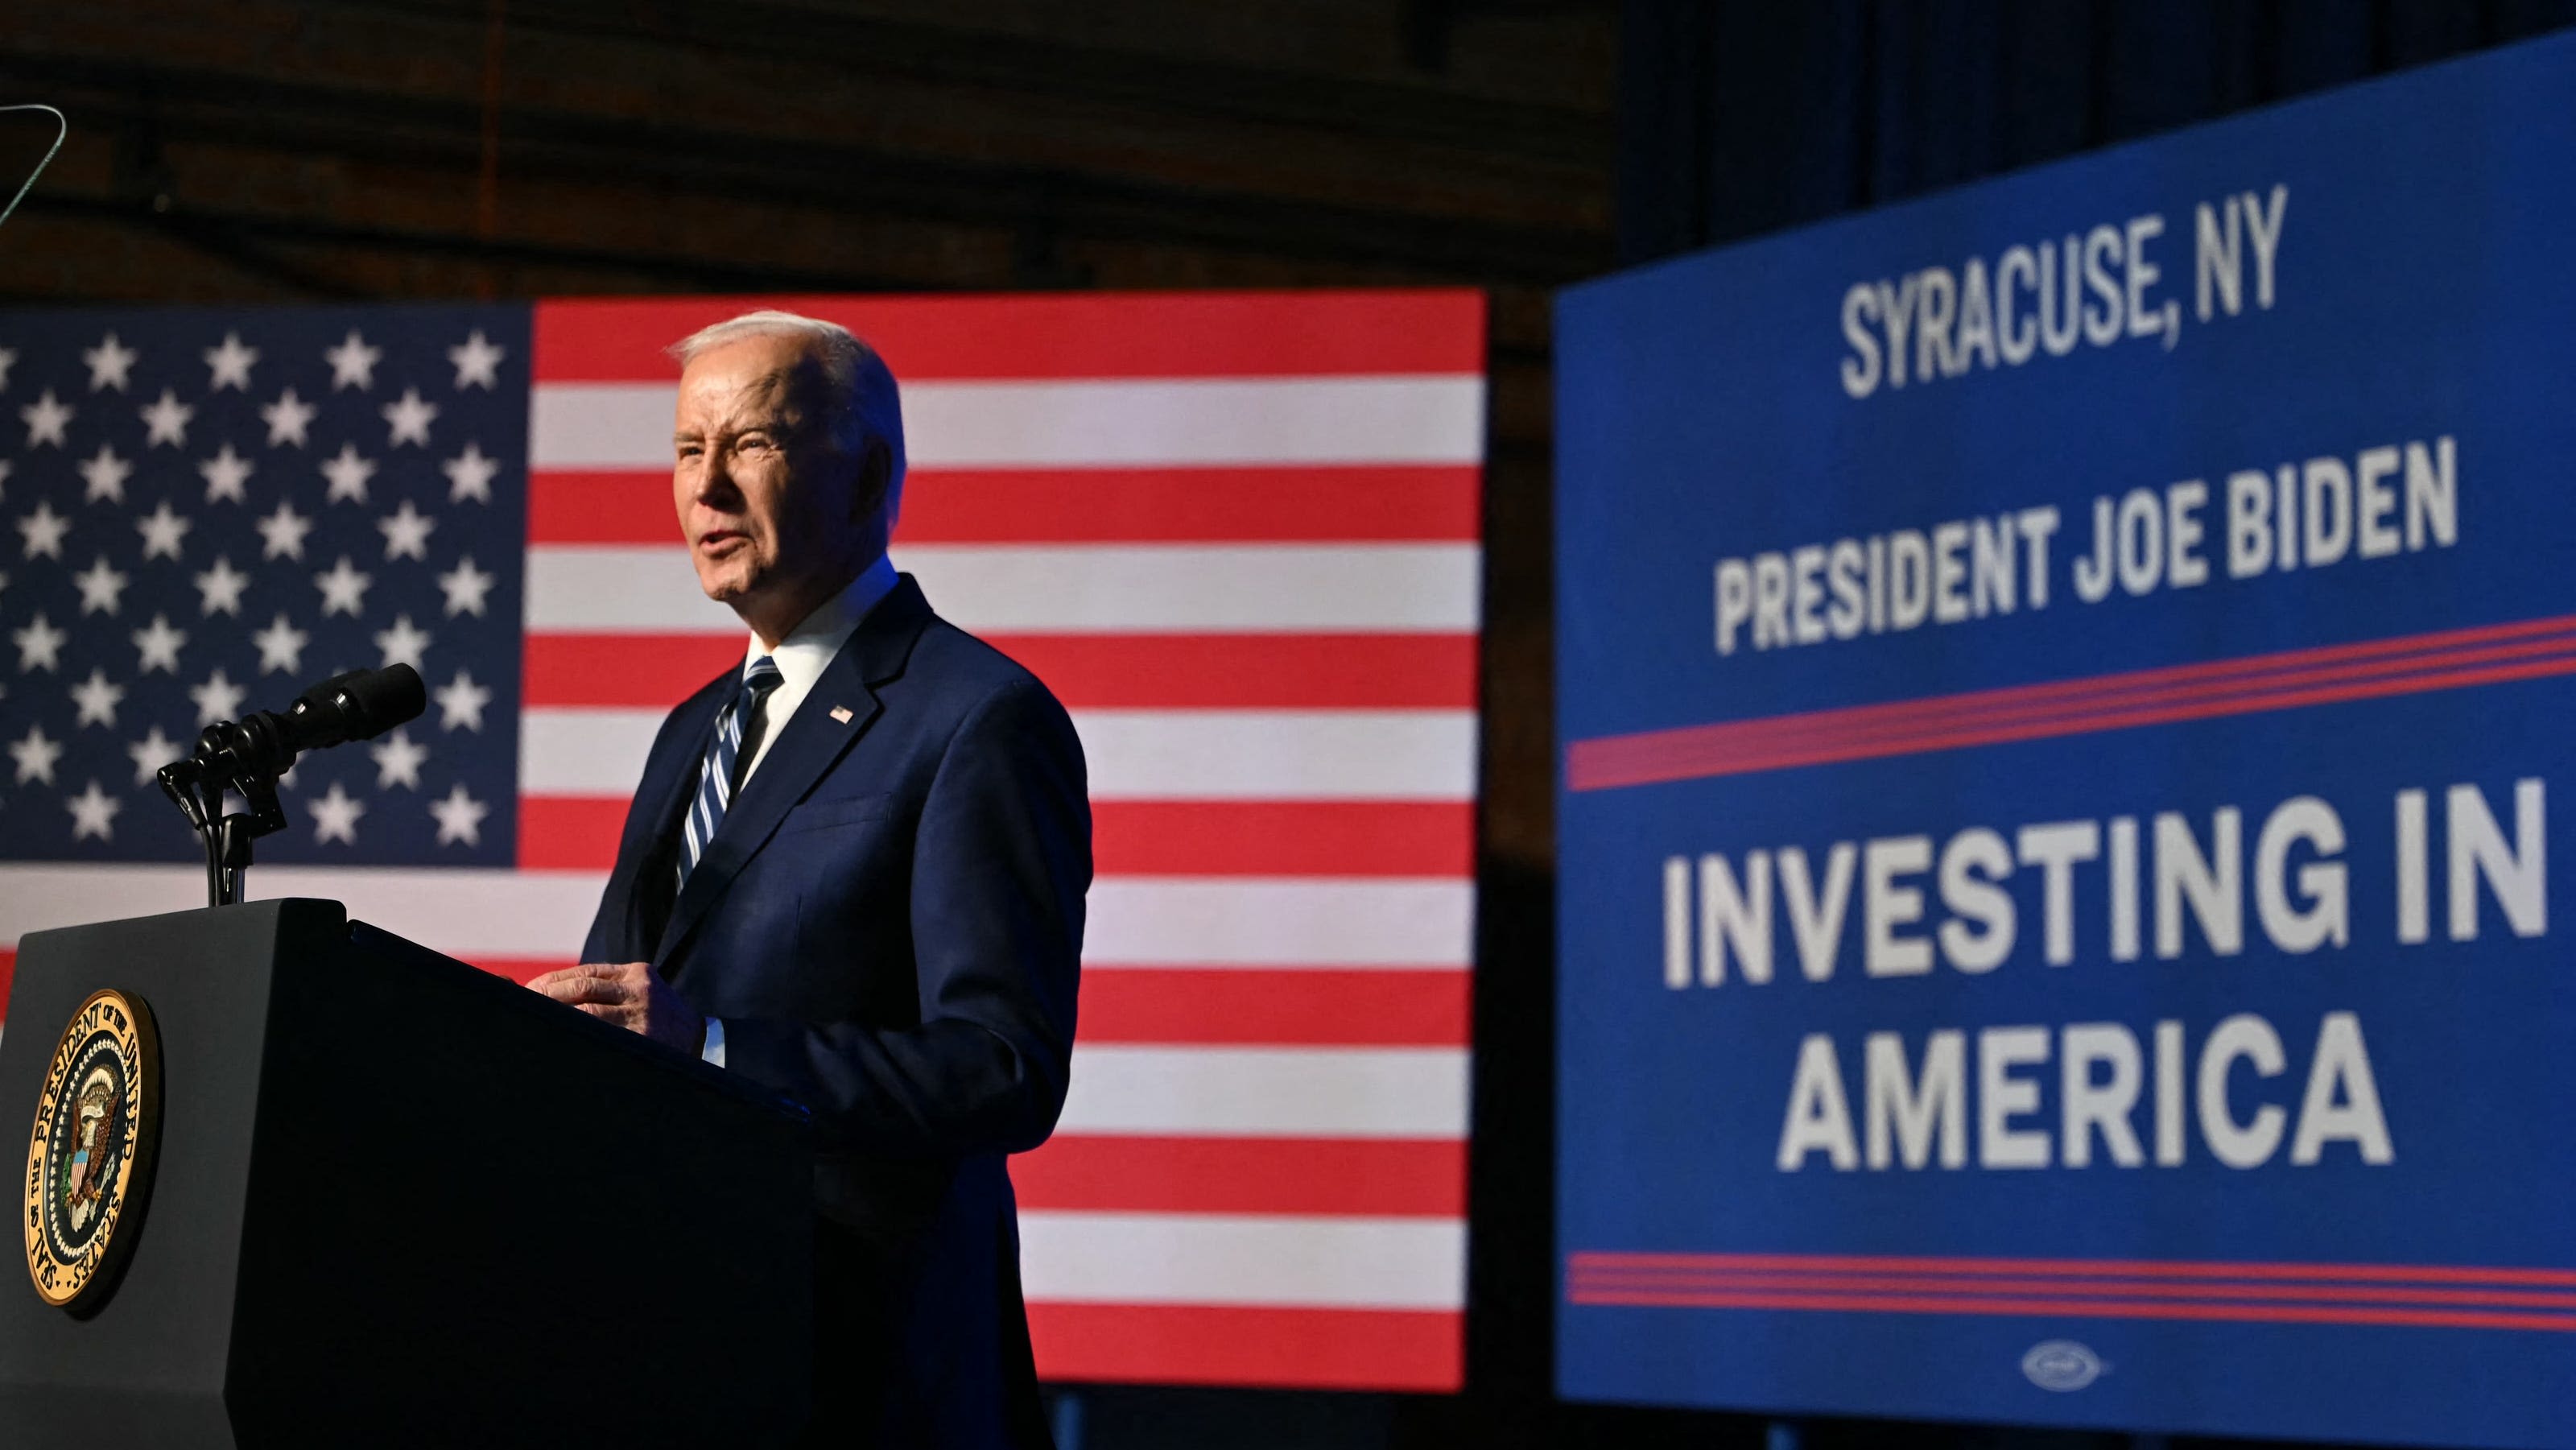 Why did Biden invoke executive privilege over the Robert Hur interview tapes?